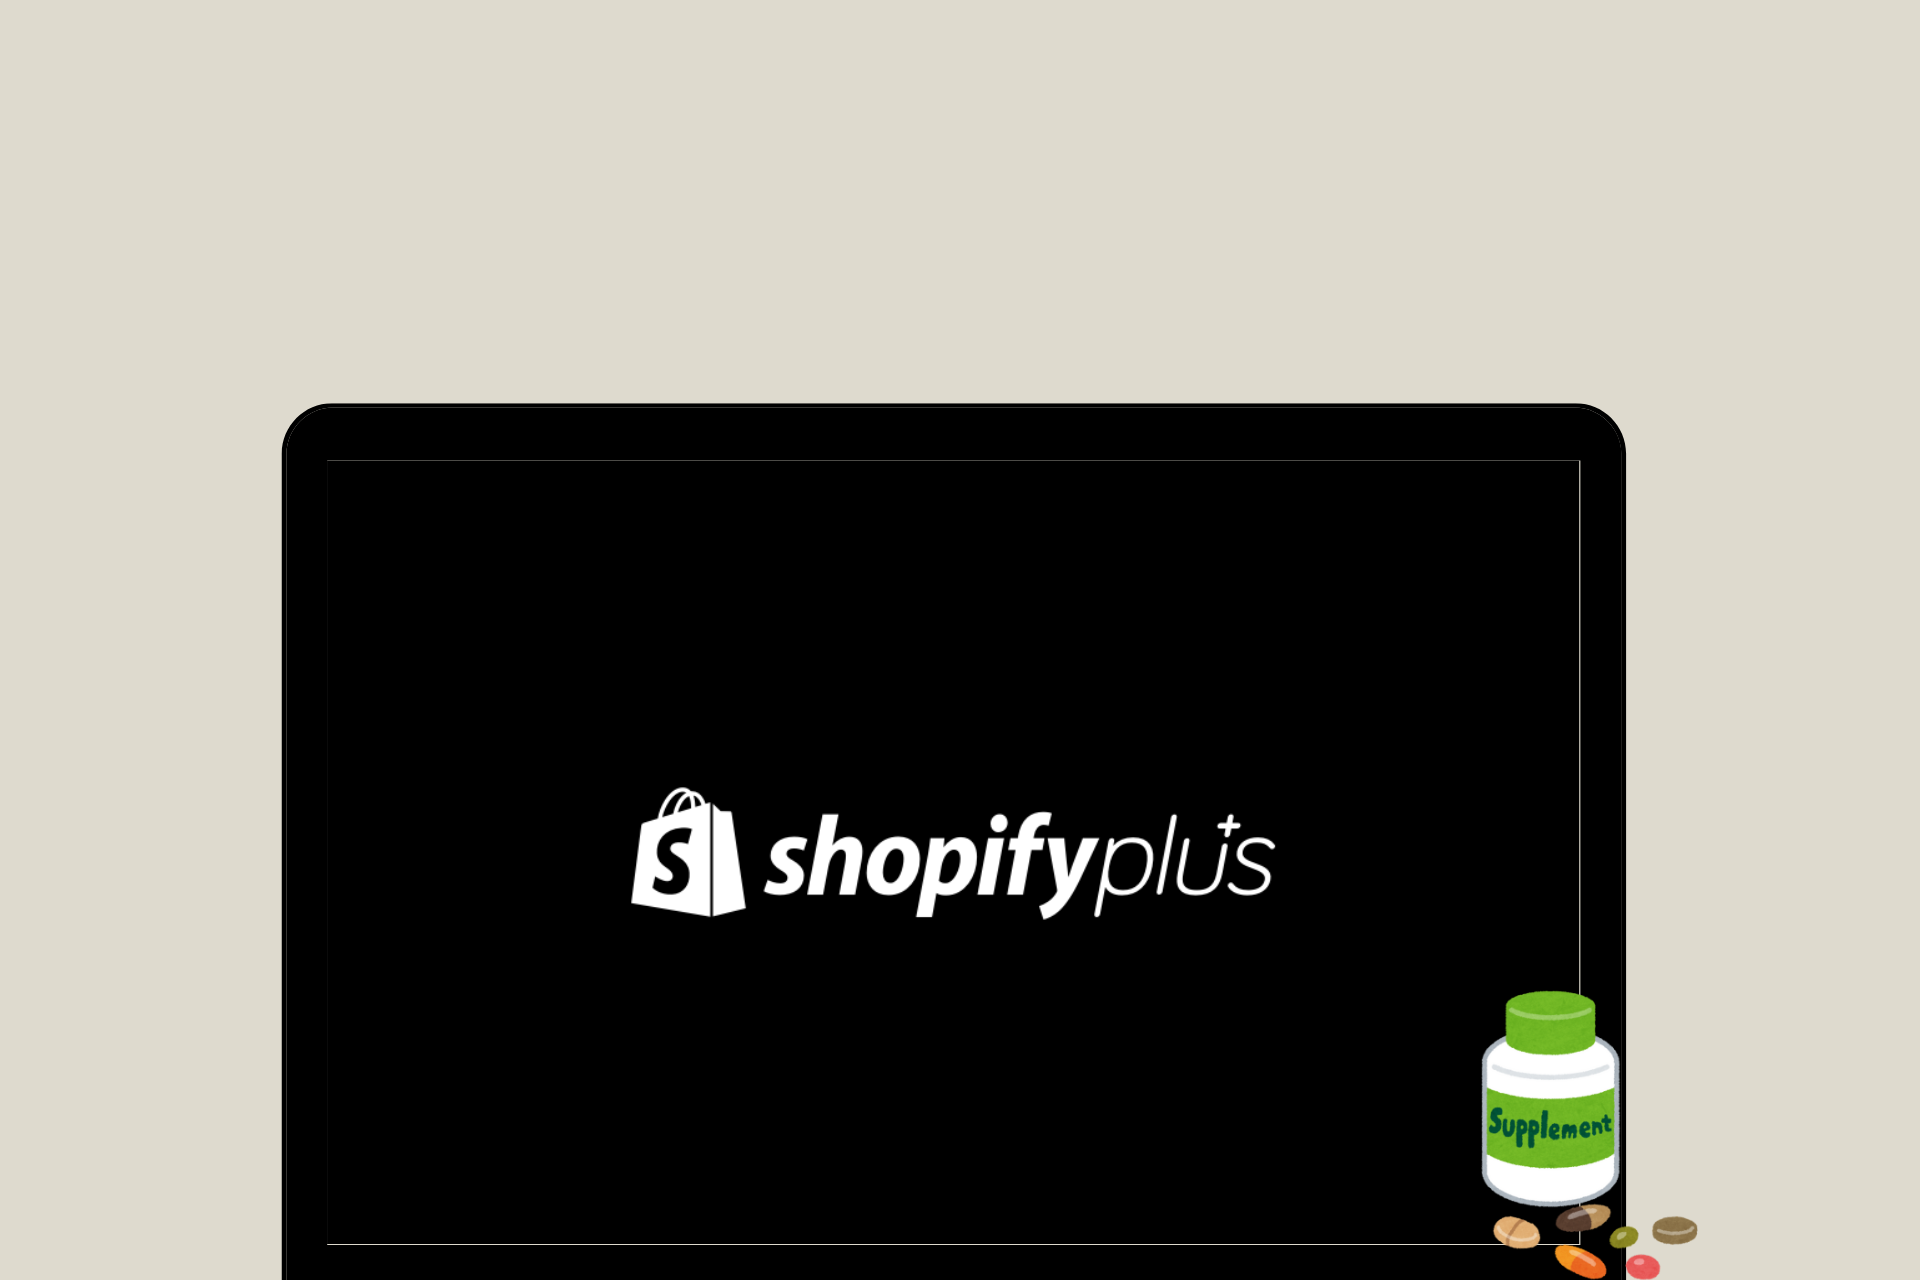 Top Vitamin & Supplement Brands On Shopify Plus